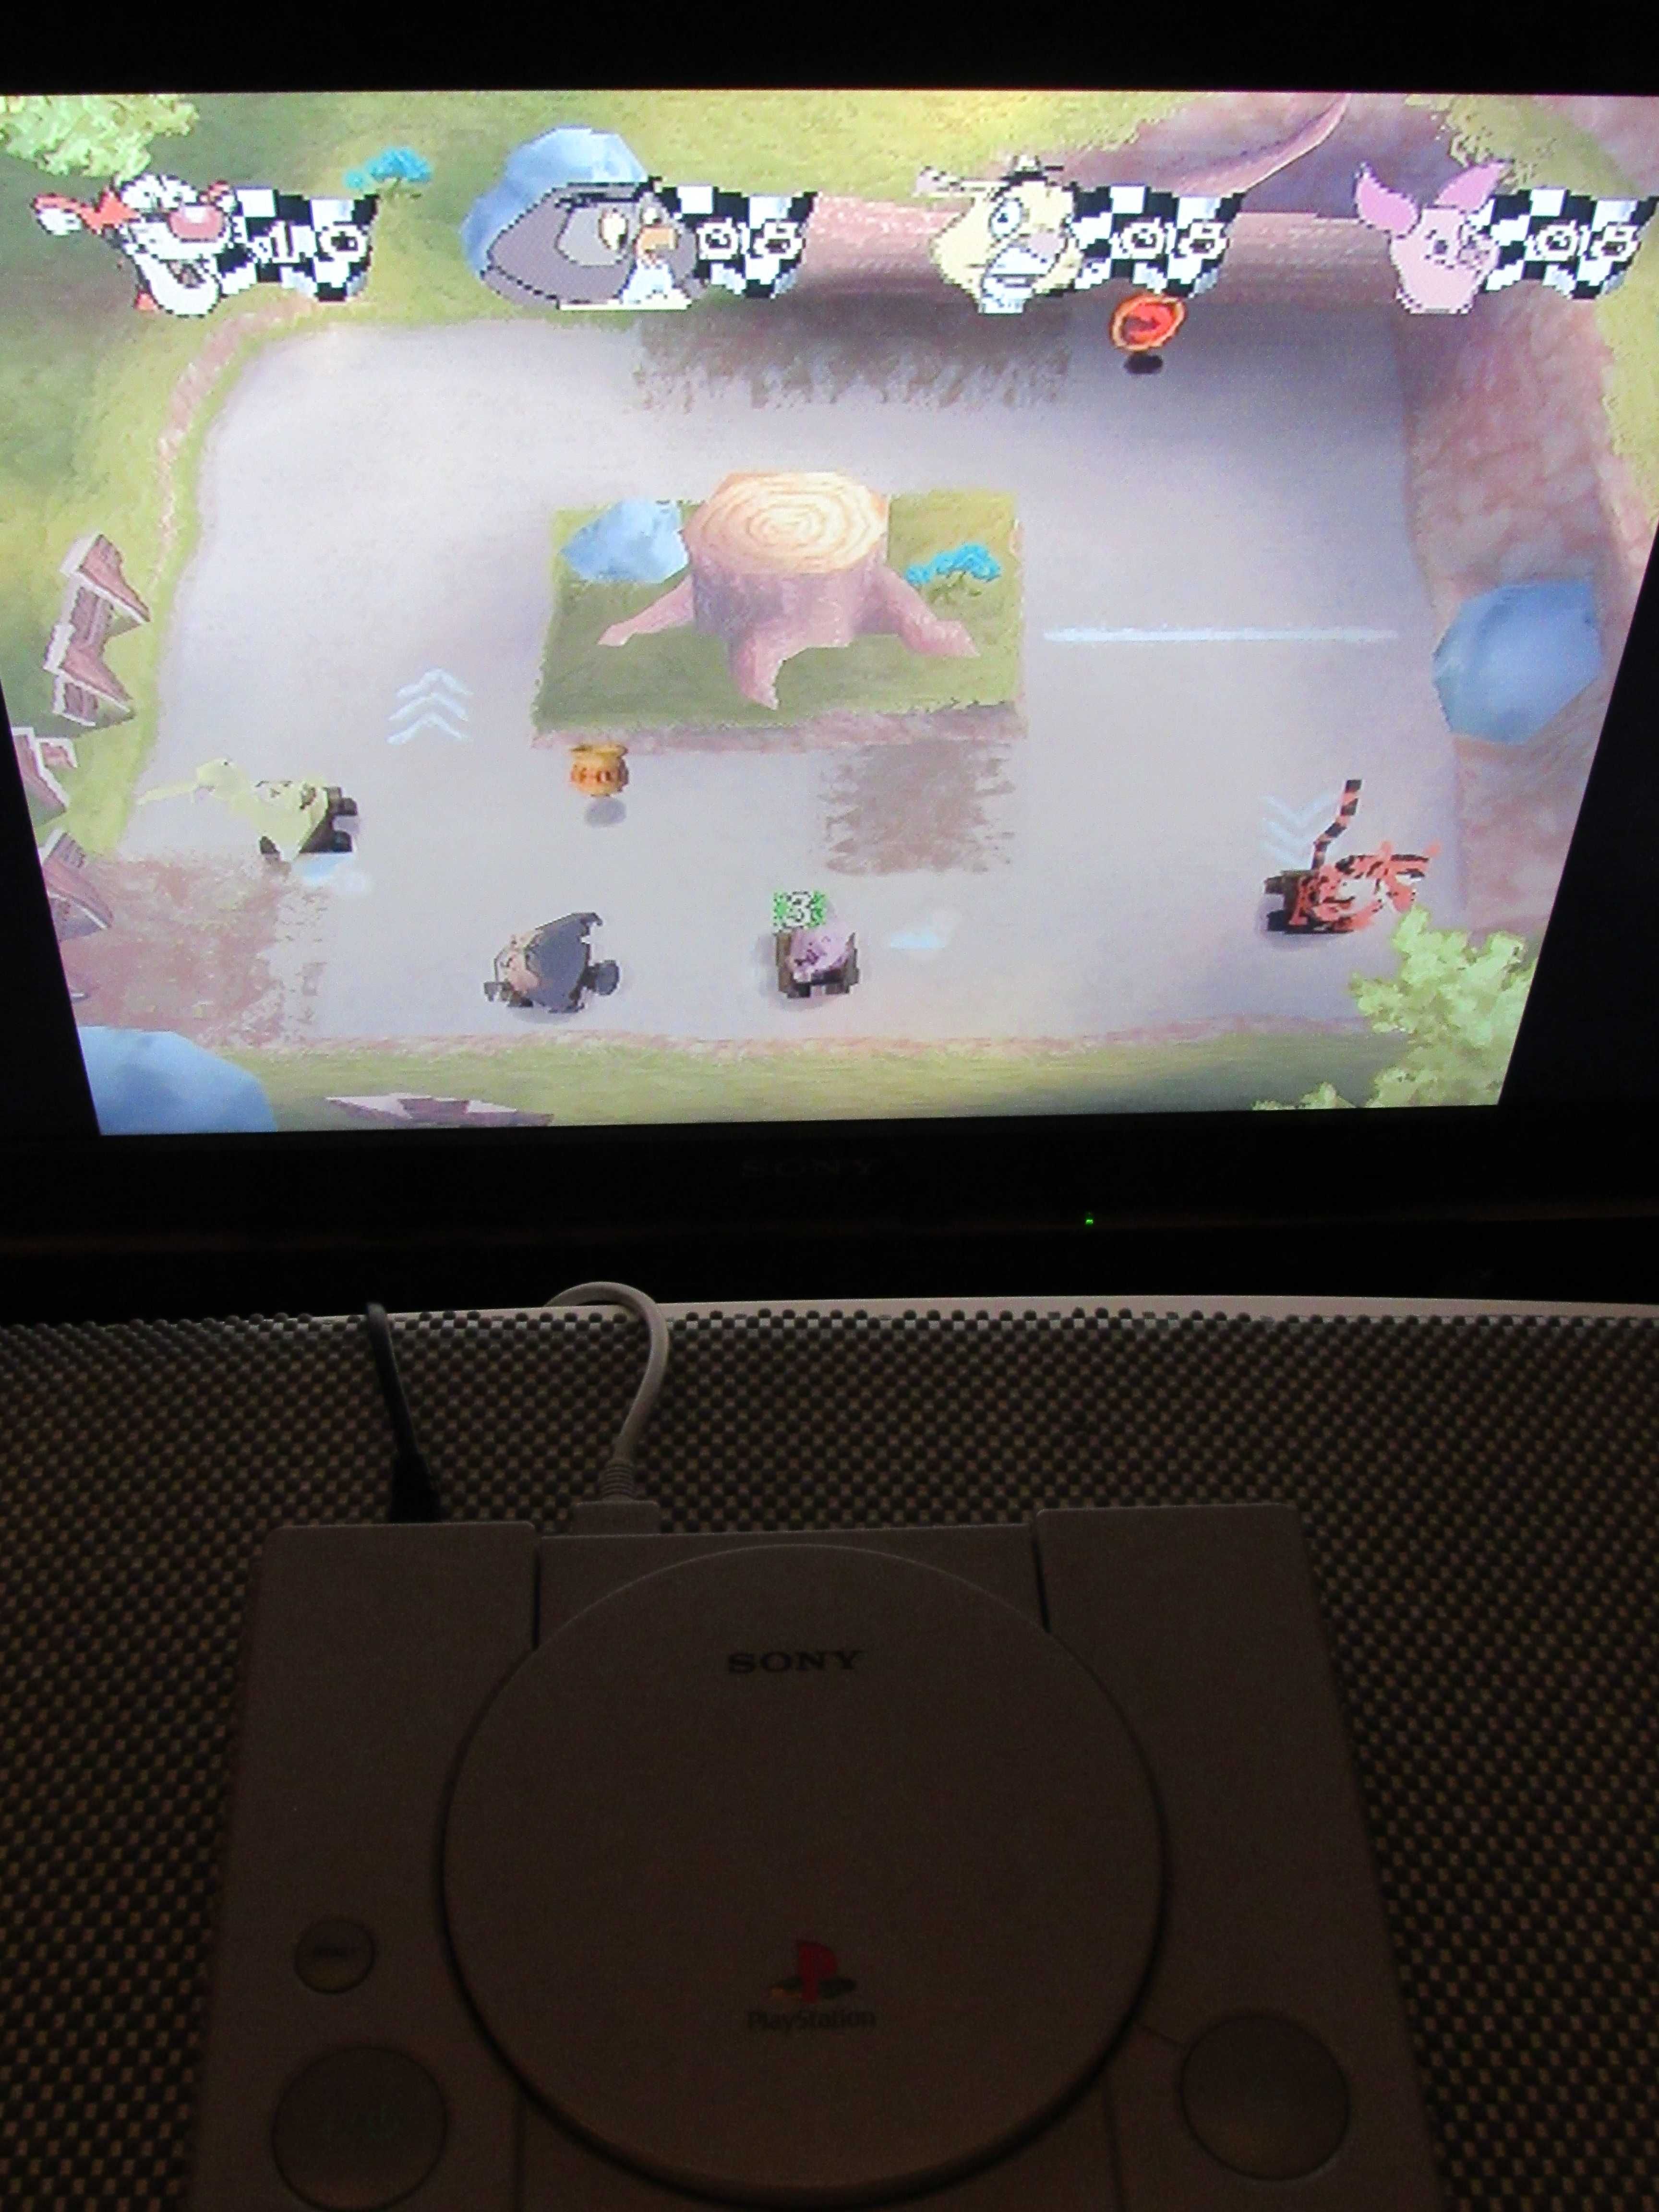 Jogo Playstation PS1 PSX PSOne Winnie the Pooh completo